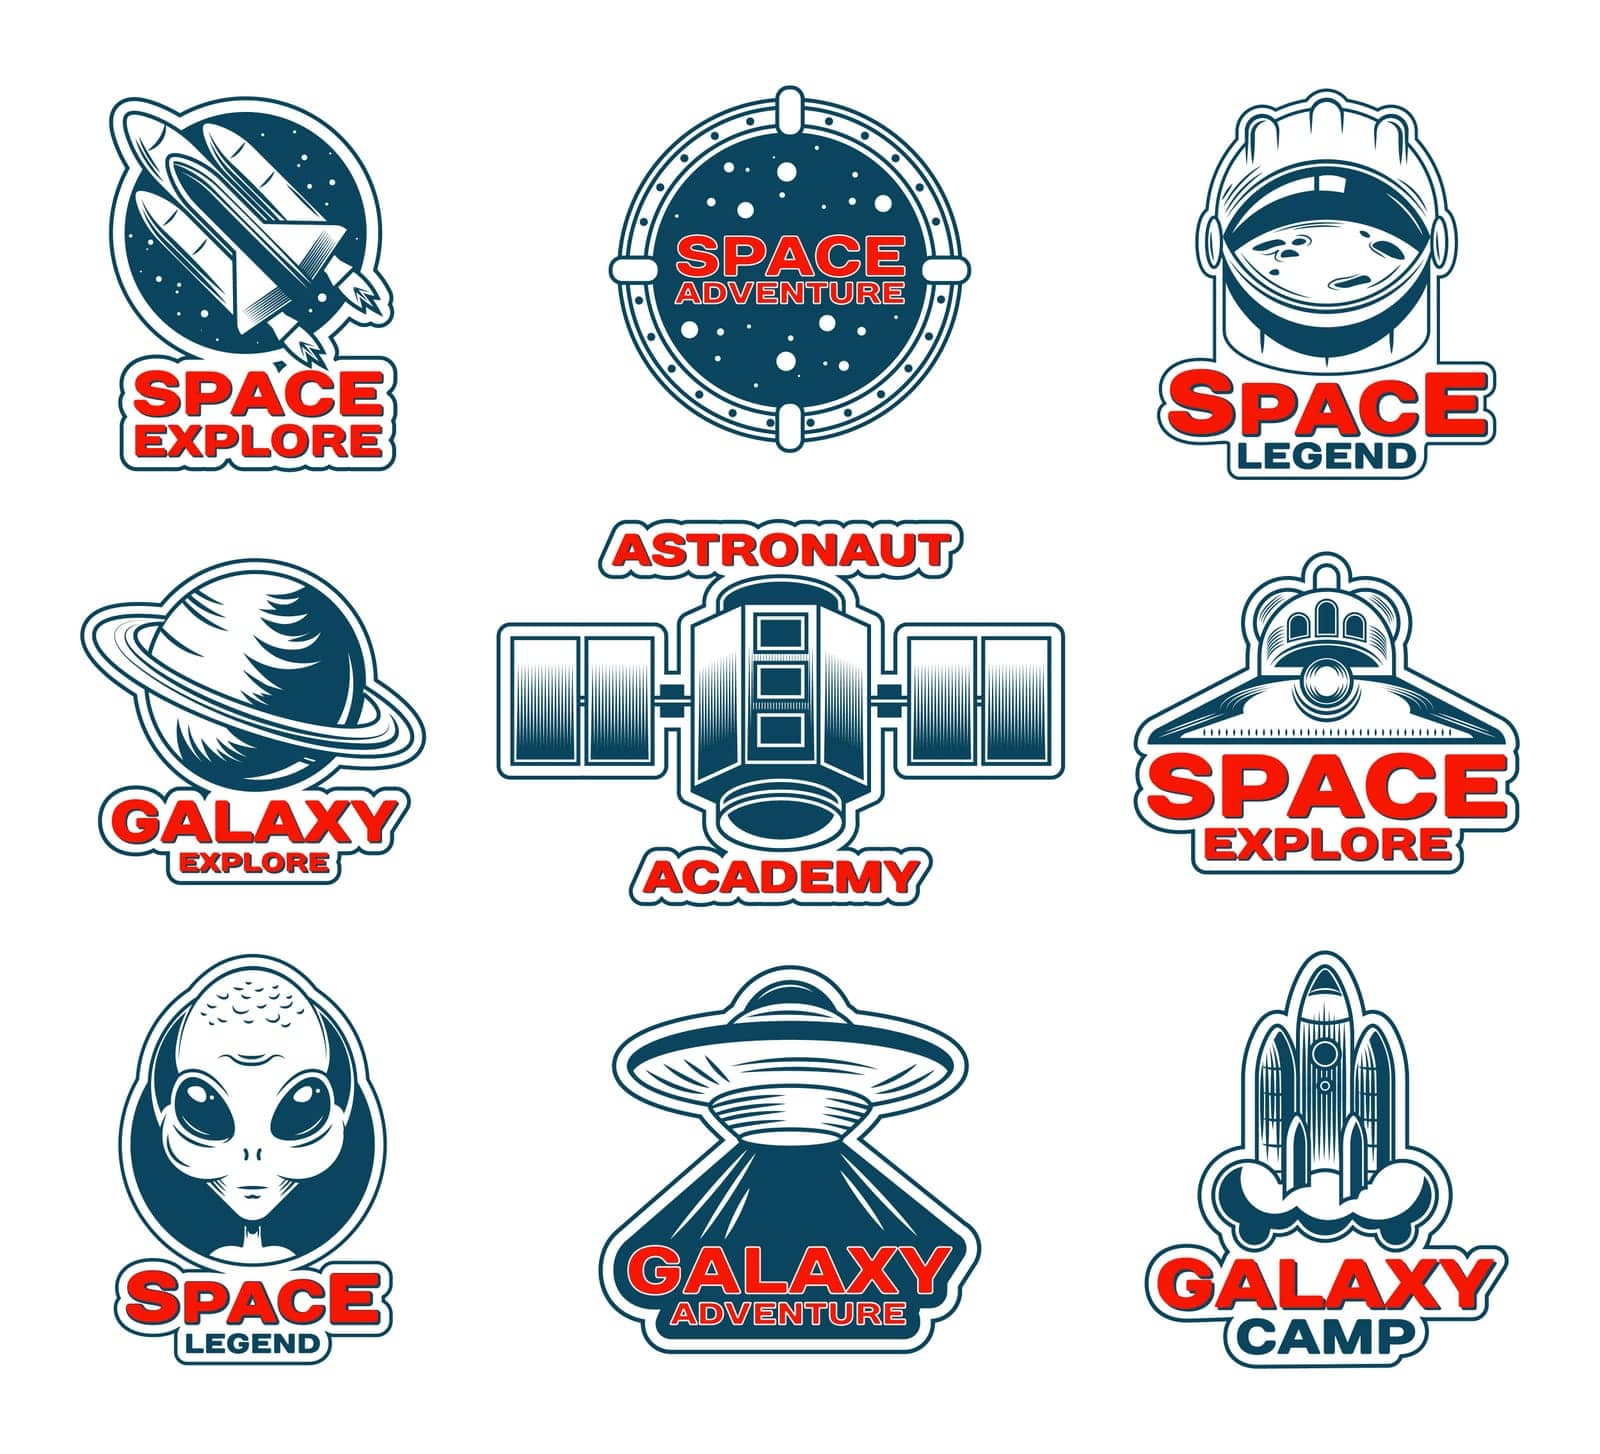 Space exploration patches set. Patch with Saturn planet, stamps with shuttle and rocket, badges with astronaut and alien in vintage style with text. For extraterrestrial life, galaxy and ufo concept